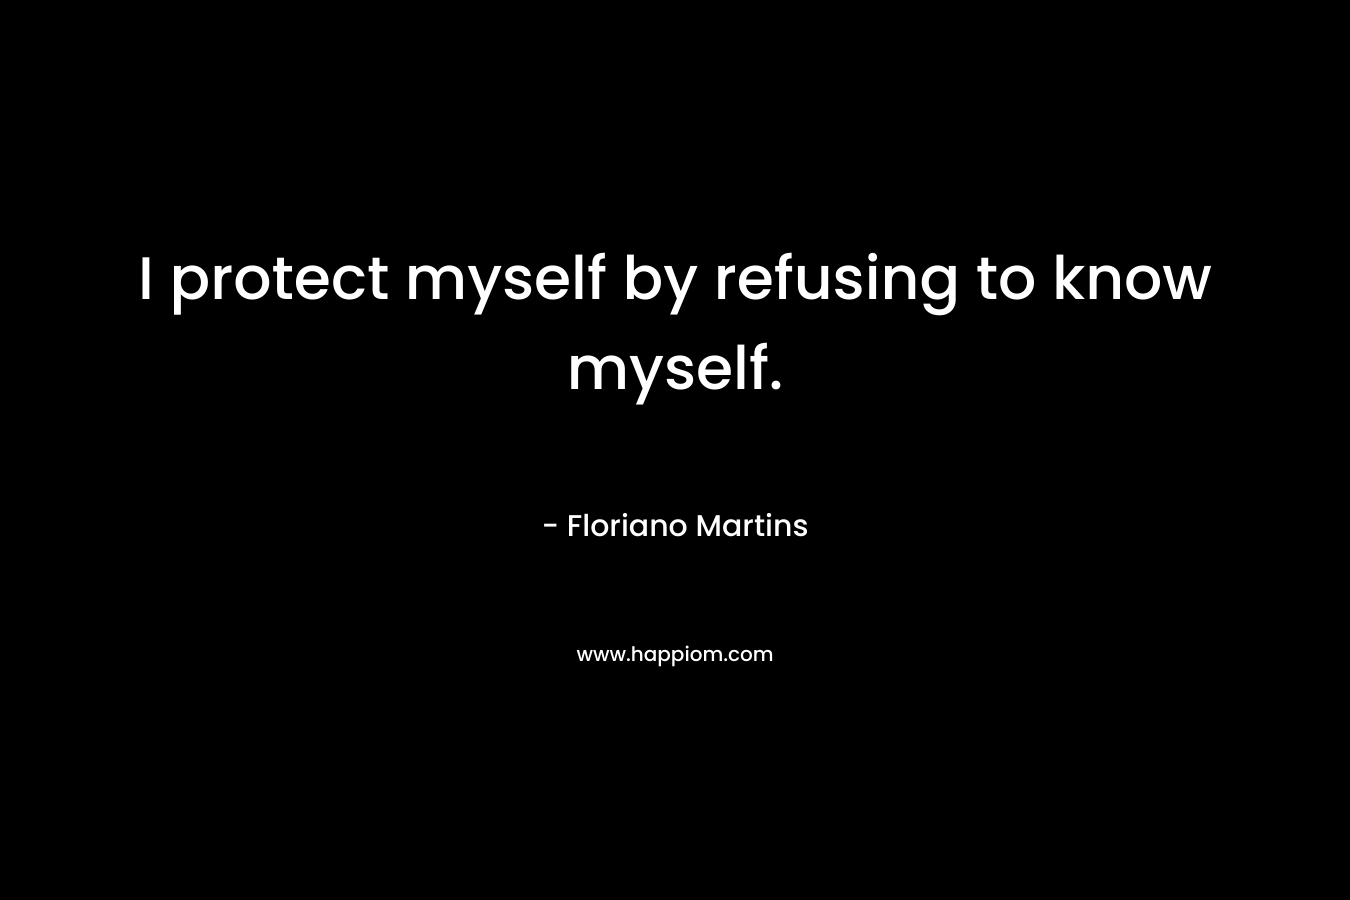 I protect myself by refusing to know myself. – Floriano Martins